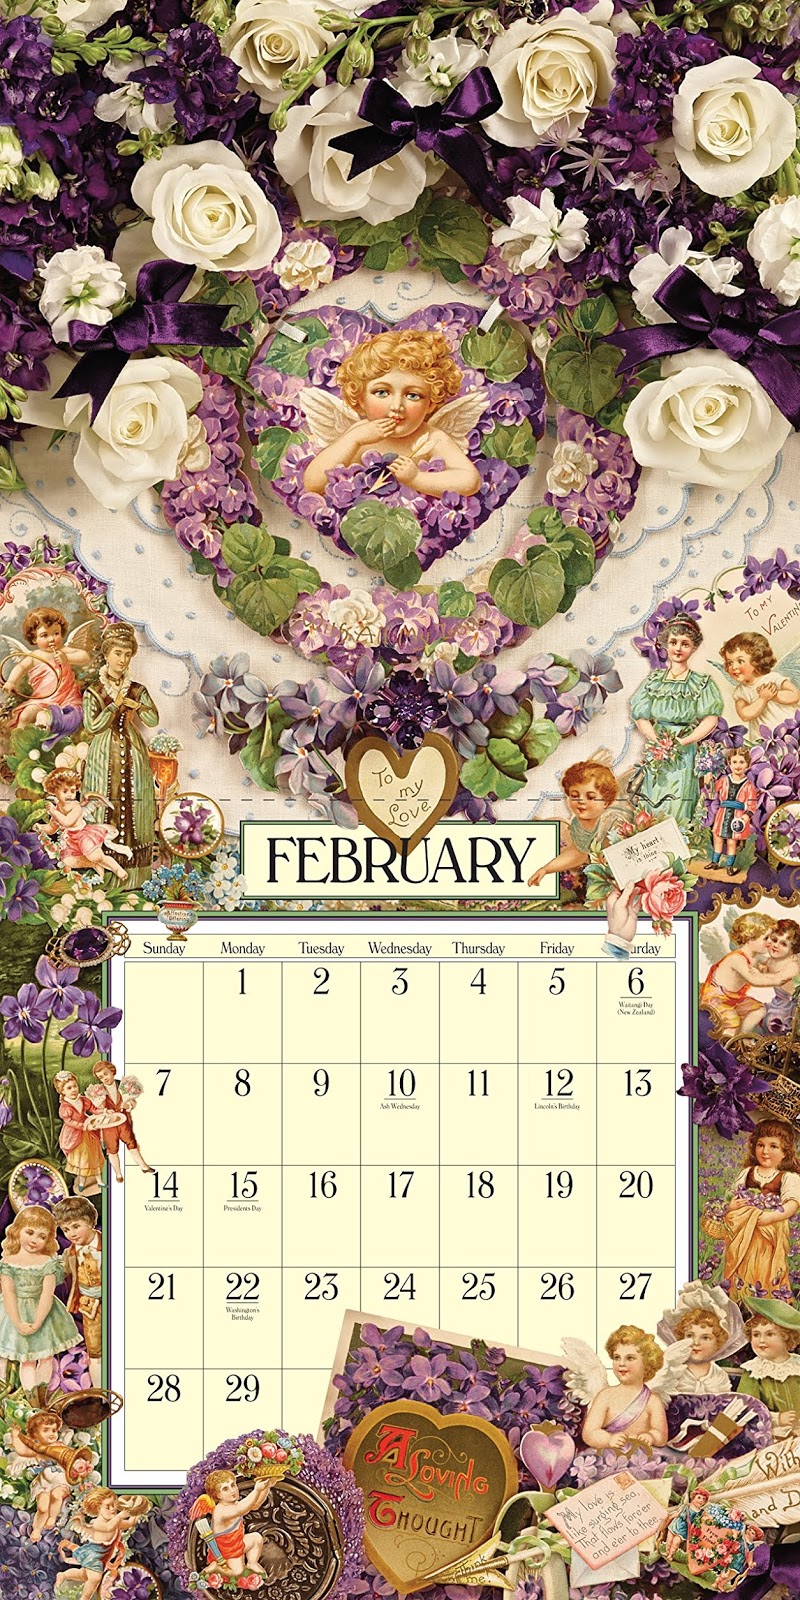 the-raving-queen-welcome-to-february-with-cynthia-hart-s-victoriana-calendar